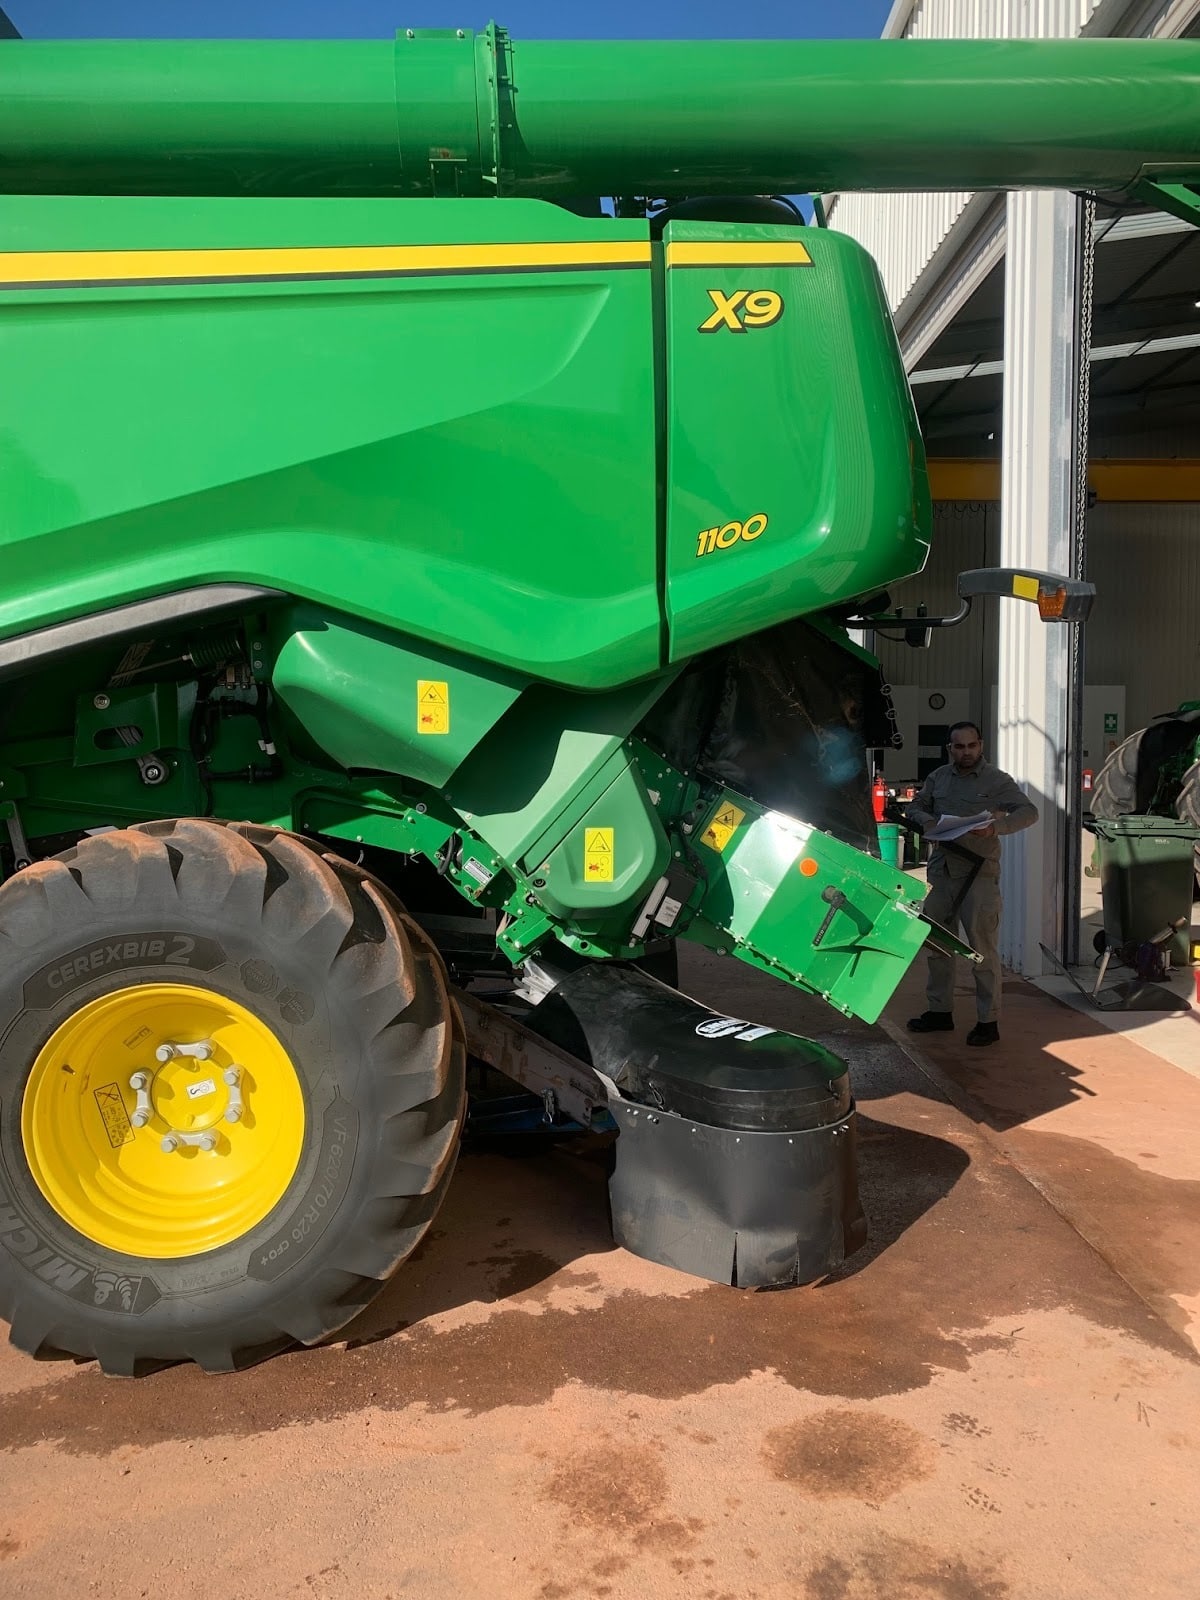 Effective Weed Management for the John Deere X9